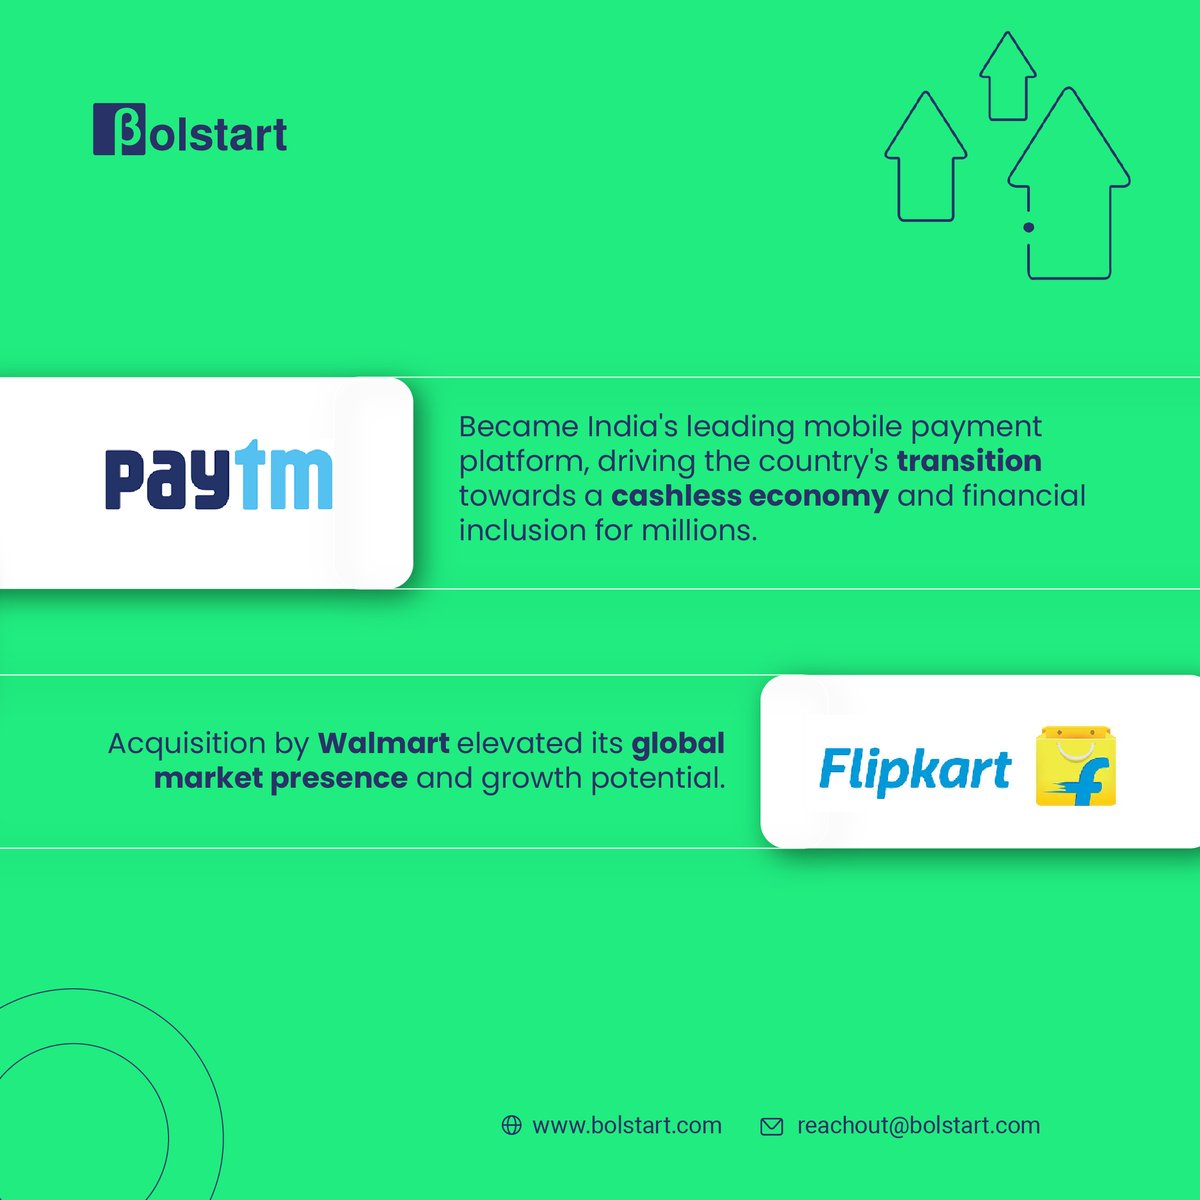 Join Bolstart to connect with visionary startups and experienced investors, fuel your success, and be inspired by the remarkable stories of Indian unicorns. 

#JoinBolstart #FuelYourSuccess #IndianUnicorns #StartupInspiration #zerodha #bigbasket #lenskart #paytm #flipkart